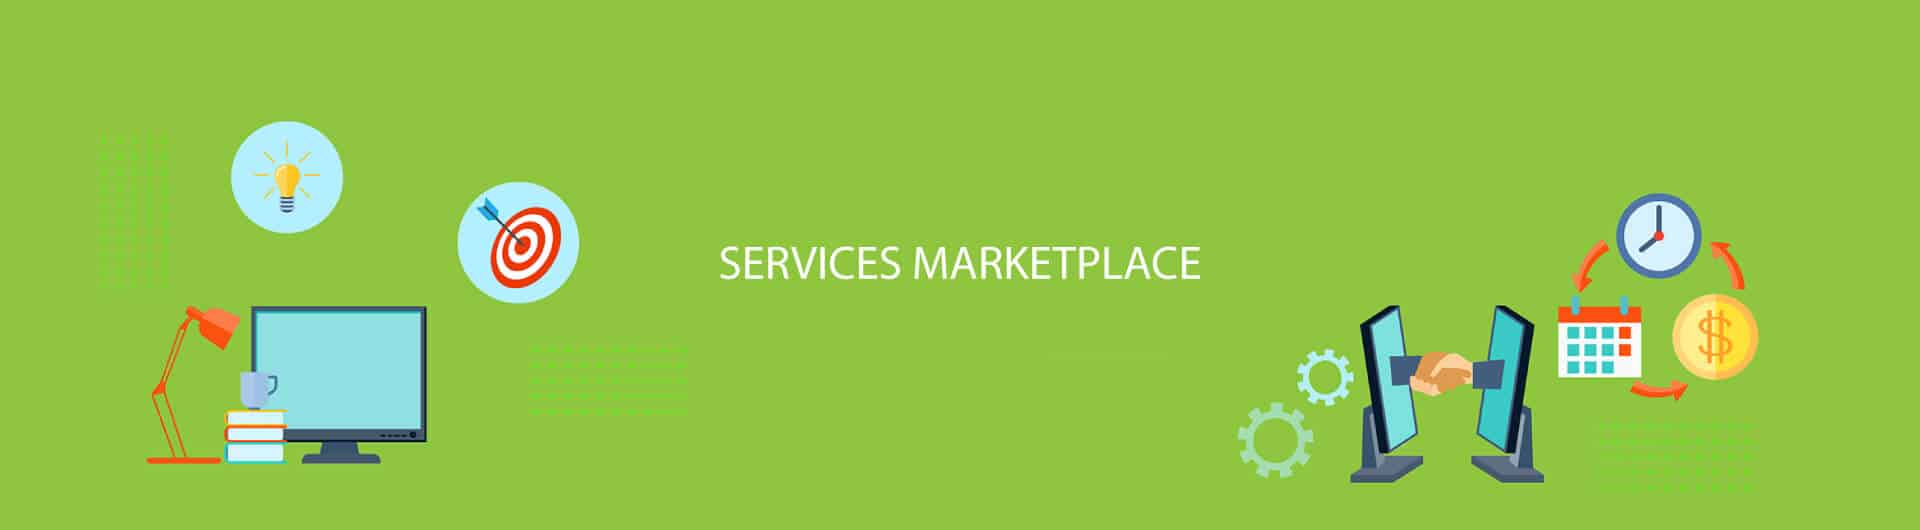 services marketplace